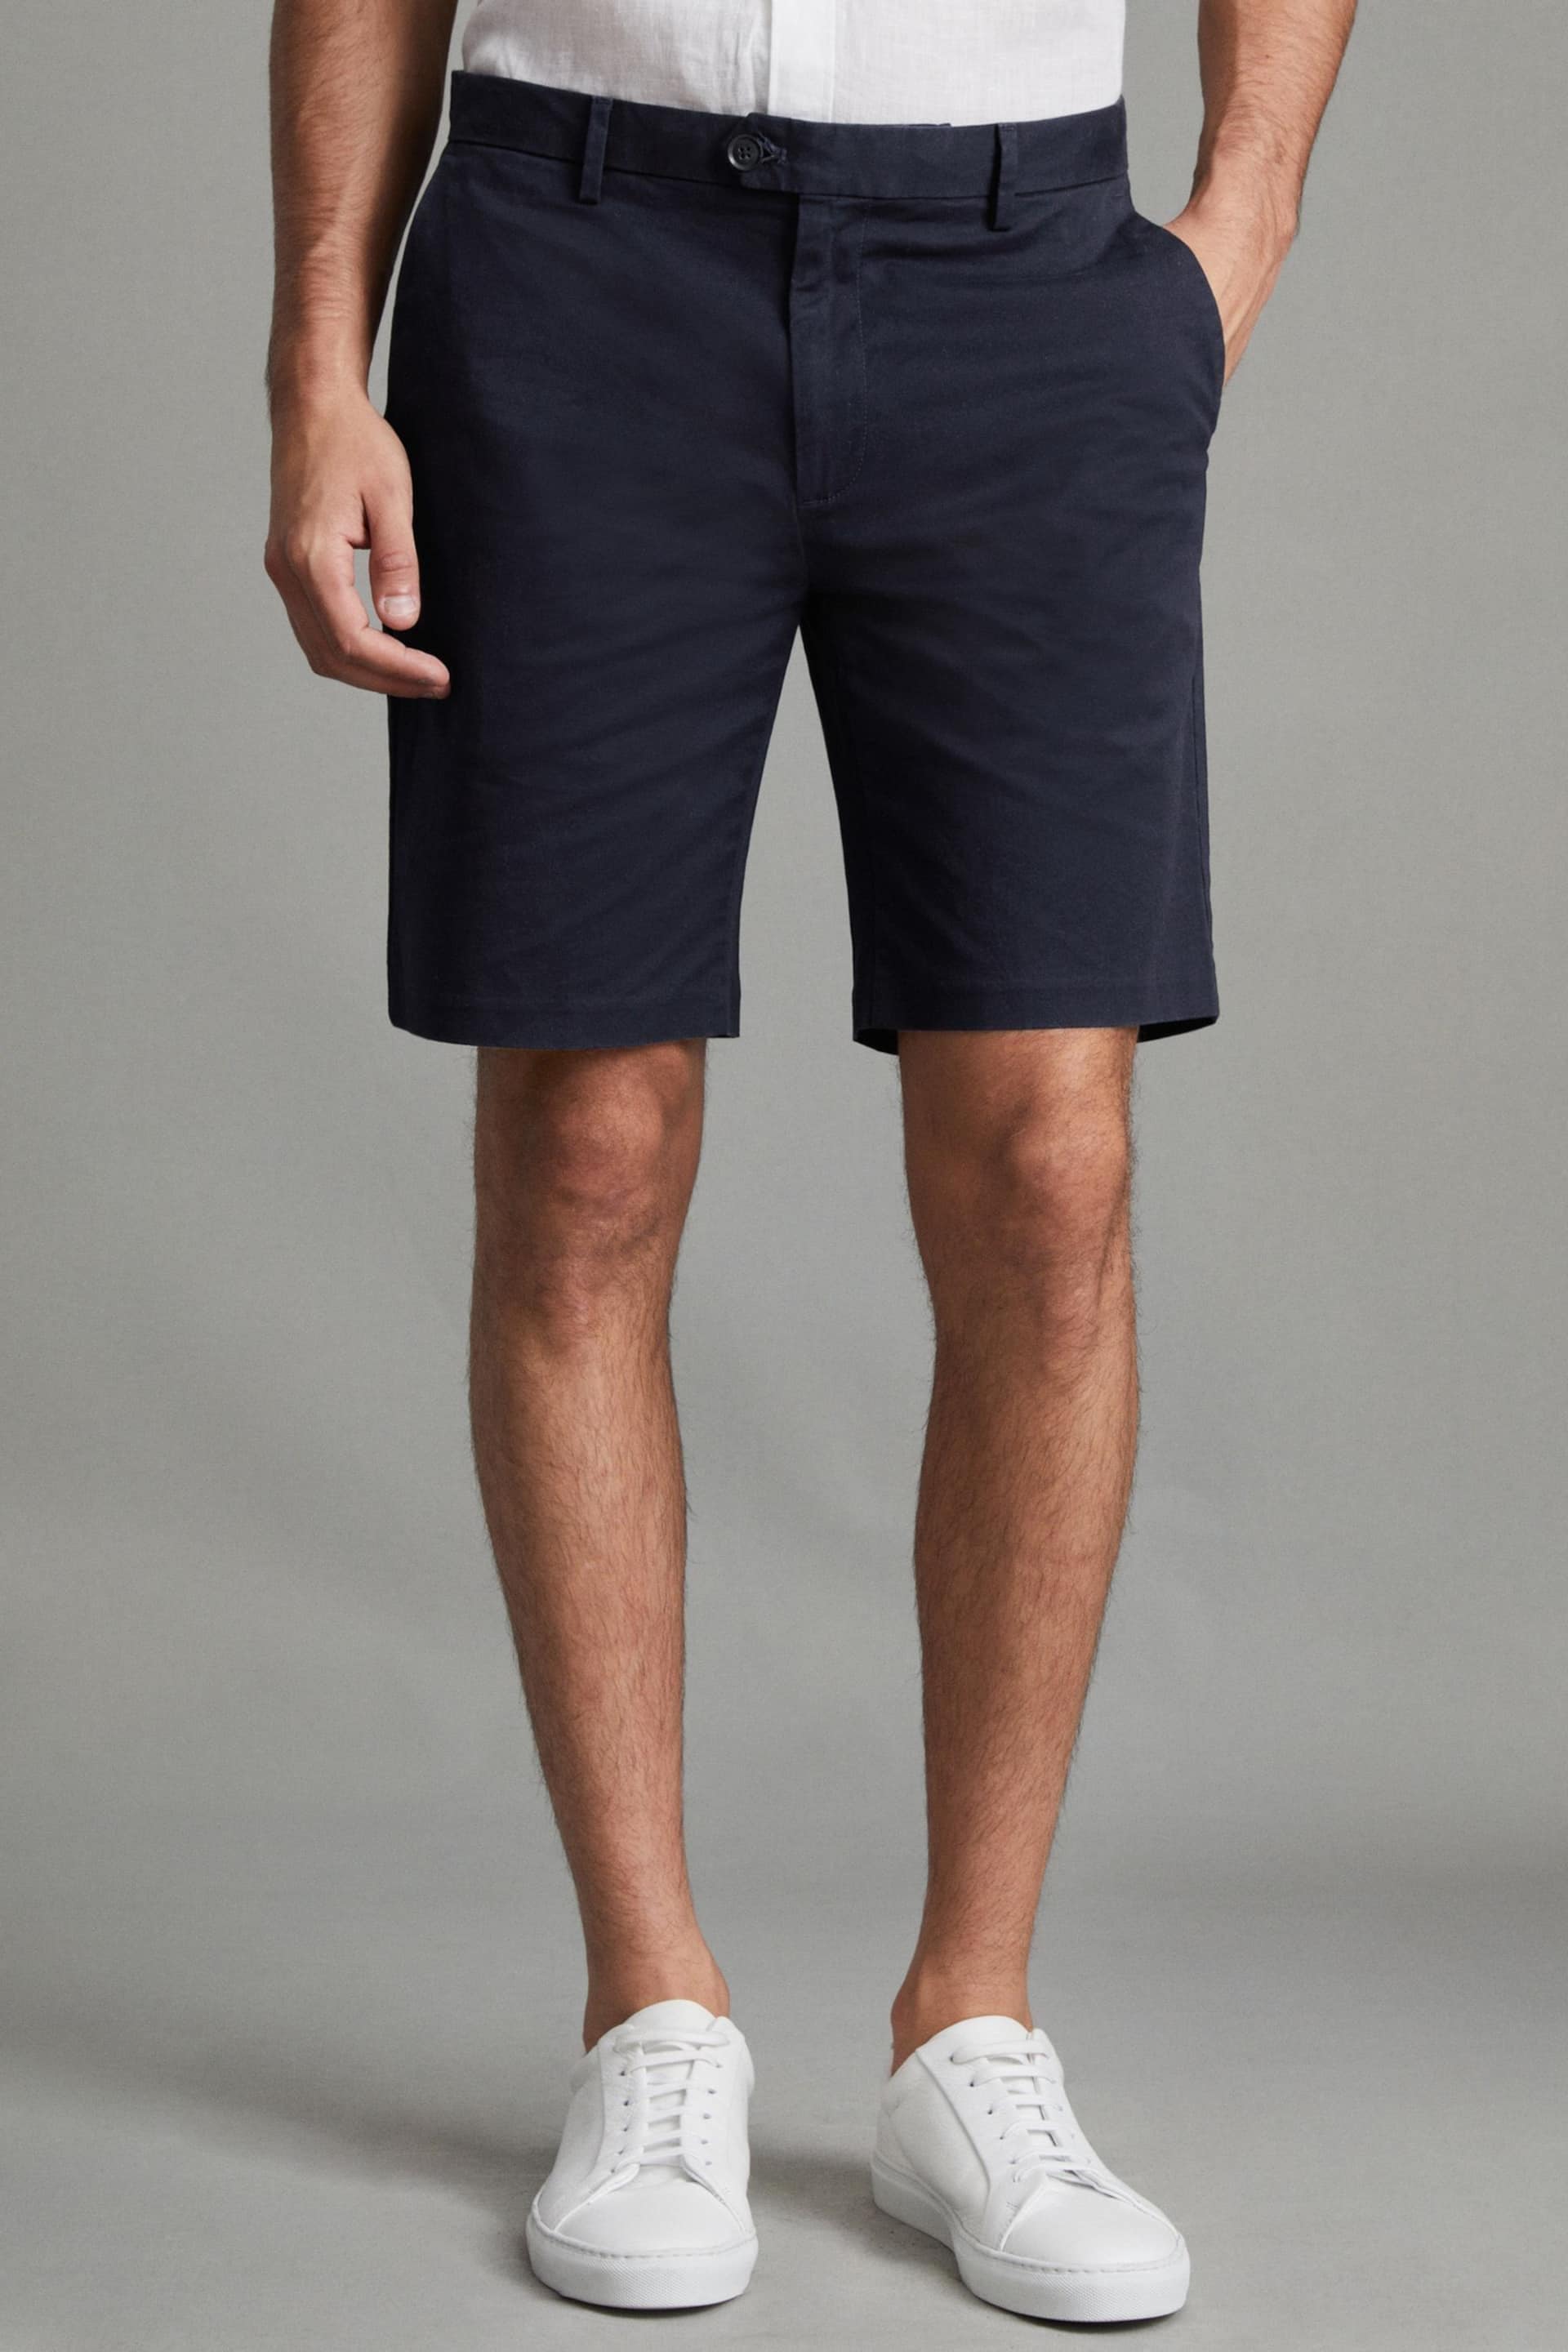 Reiss Navy Wicket Modern Fit Cotton Blend Chino Shorts - Image 1 of 6